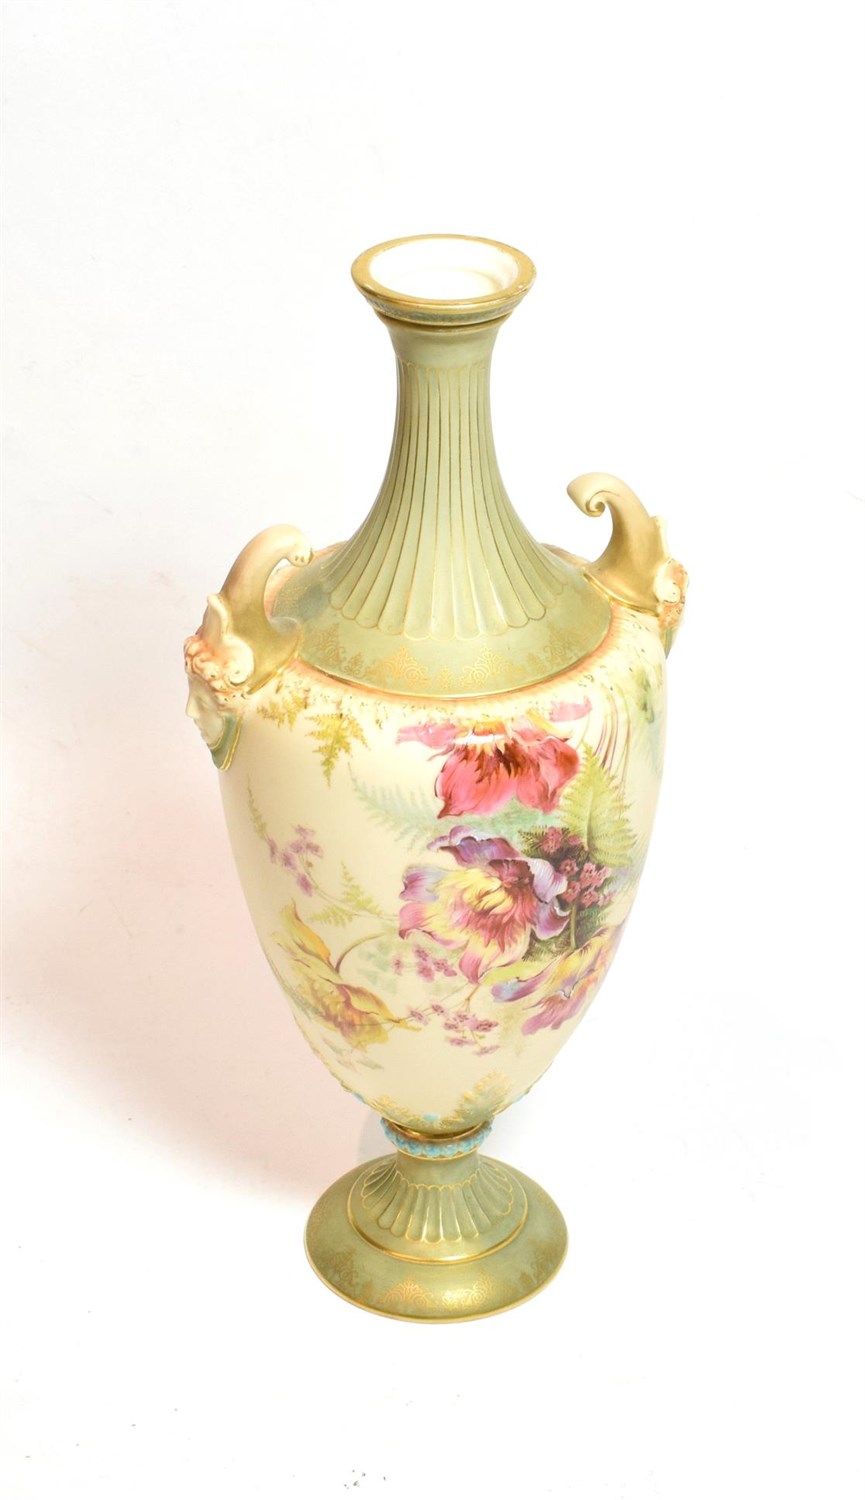 Lot 27 - A Royal Worcester twin-handled floral painted blue ivory vase (lacking cover), model no. 1911, 33cm